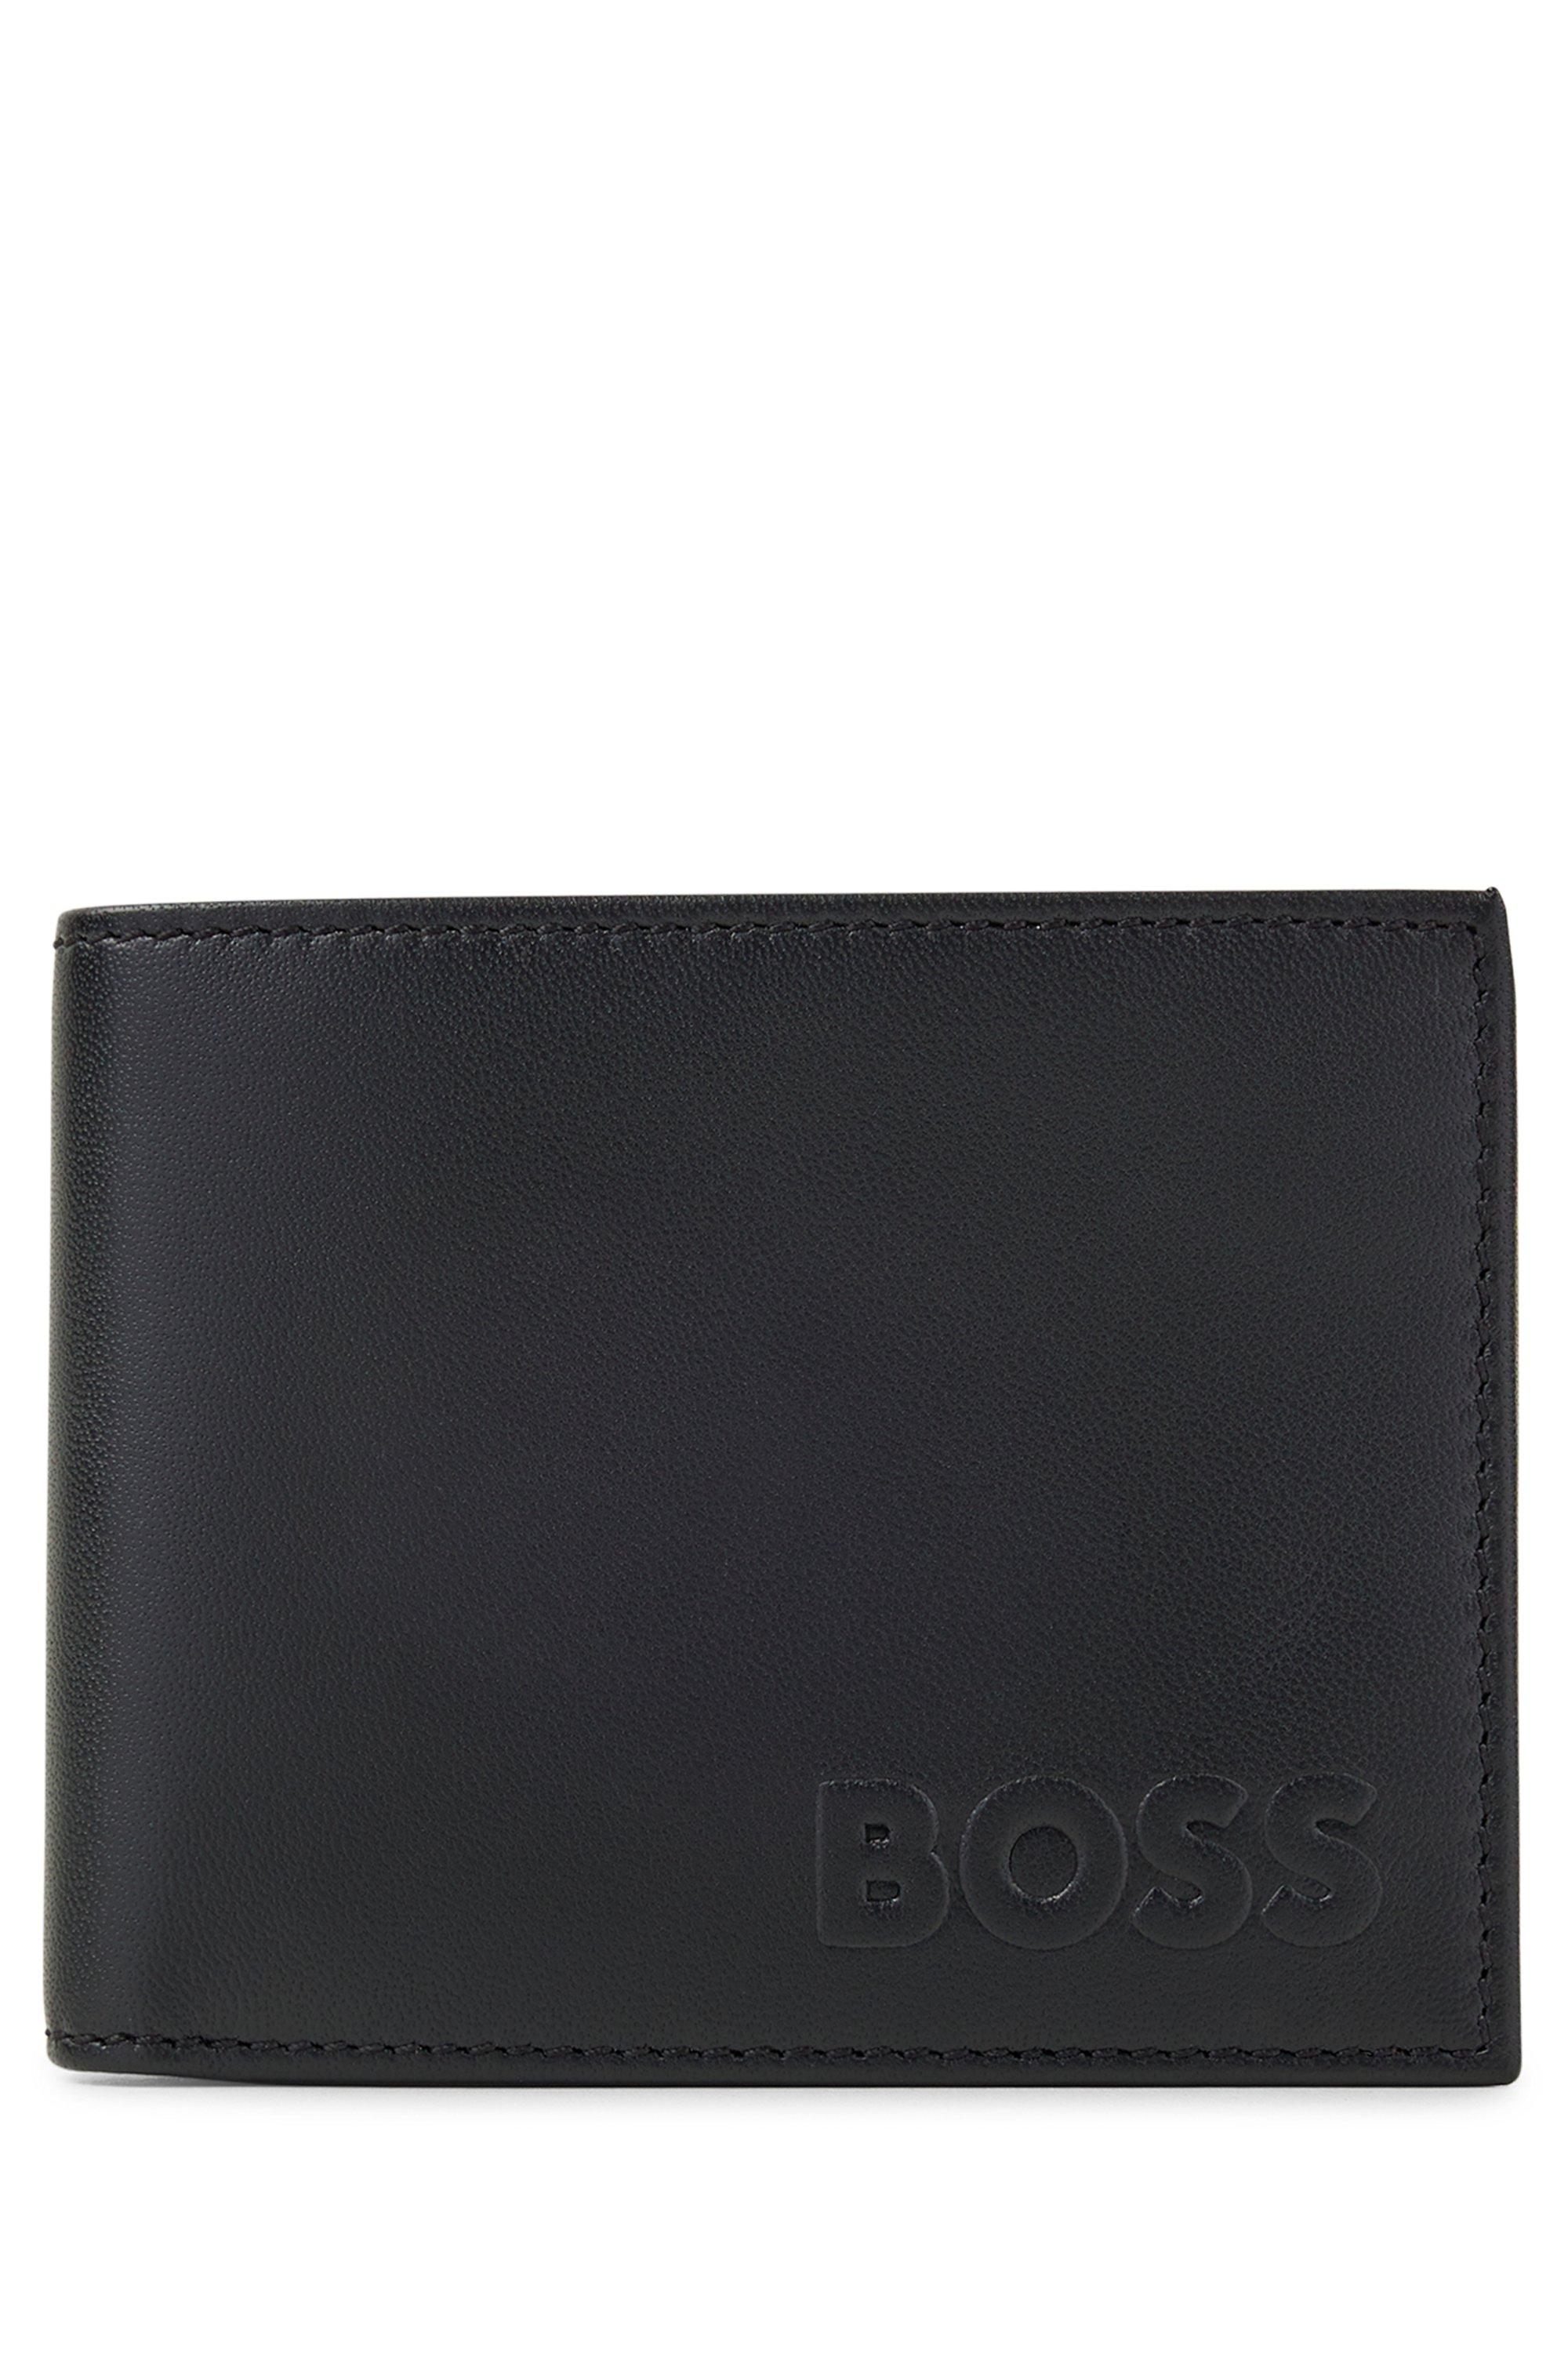 BOSS by HUGO BOSS Leather Wallet With Raised Logo And Signature Stripes ...